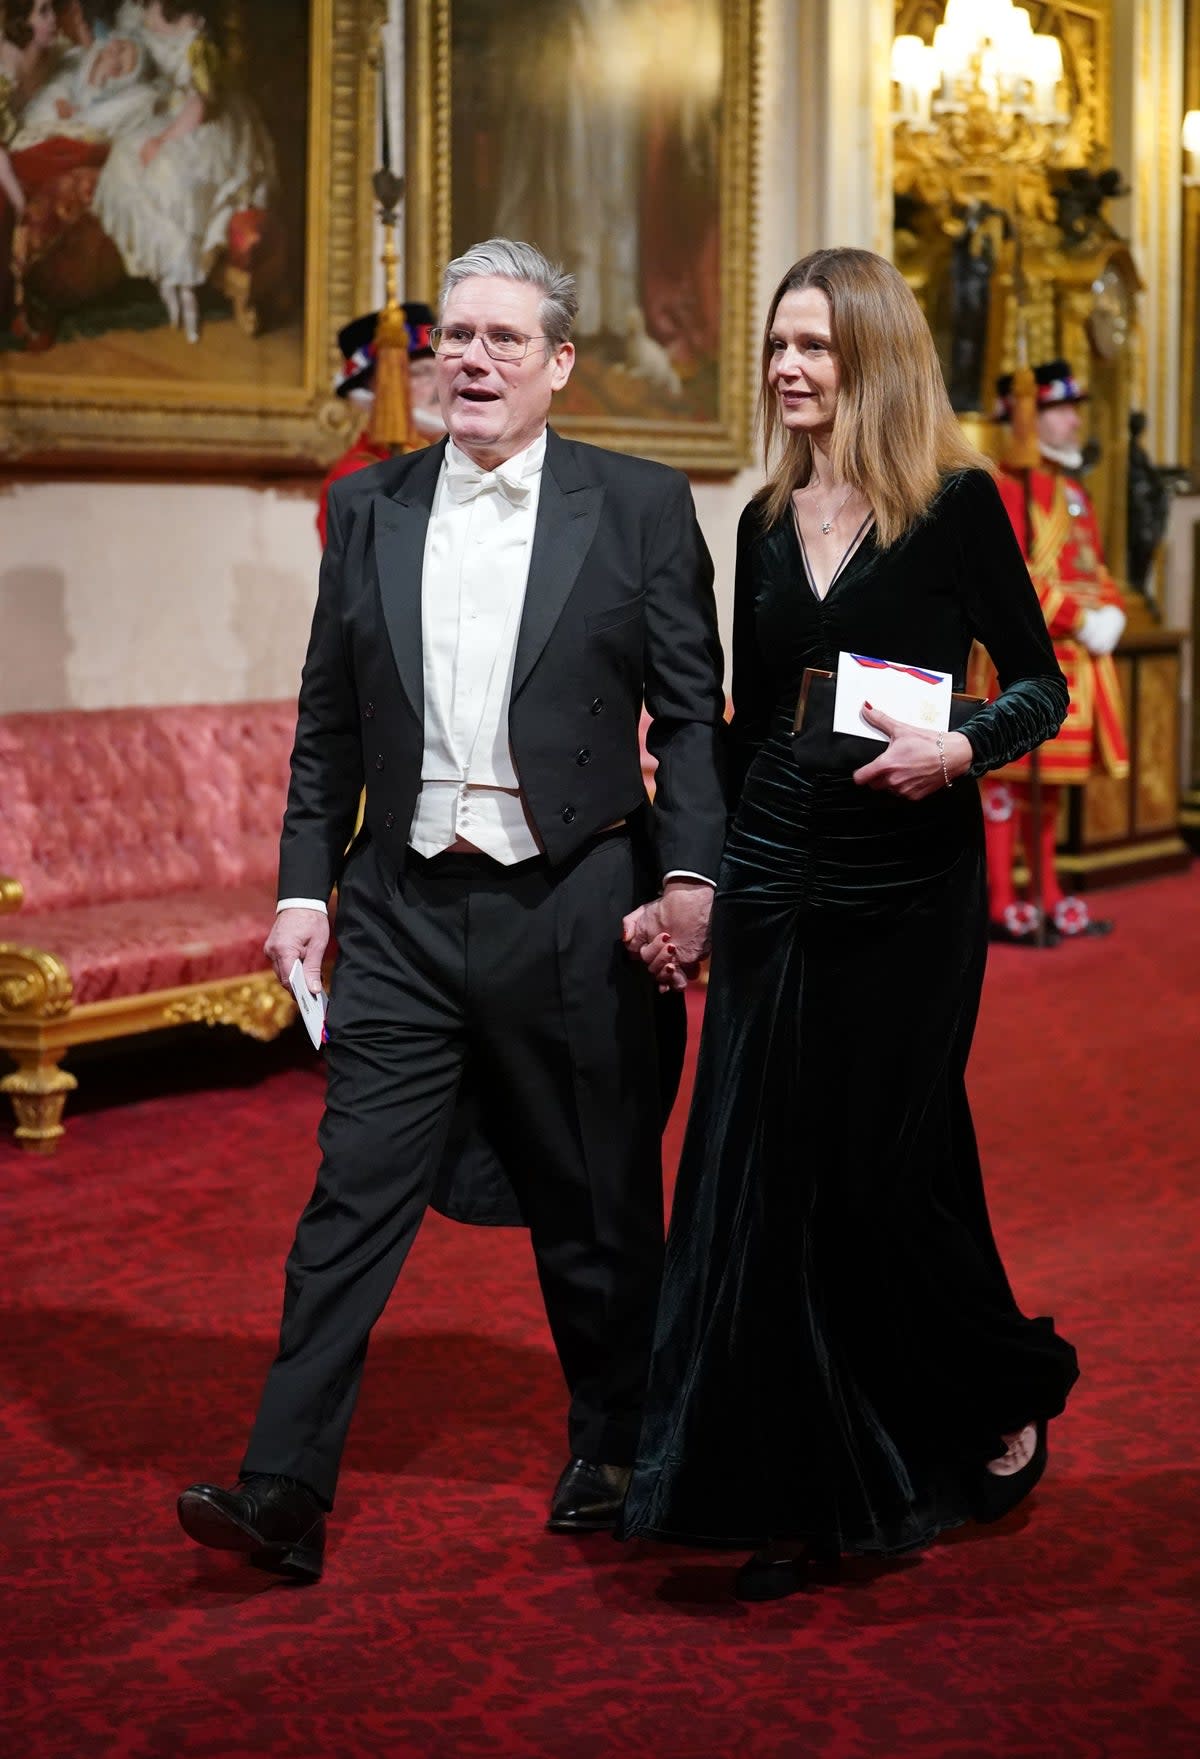 Sir Keir Starmer and wife Victoria Starmer attend the State Banquet at Buckingham Palace on November 21, 2023 (Getty Images)